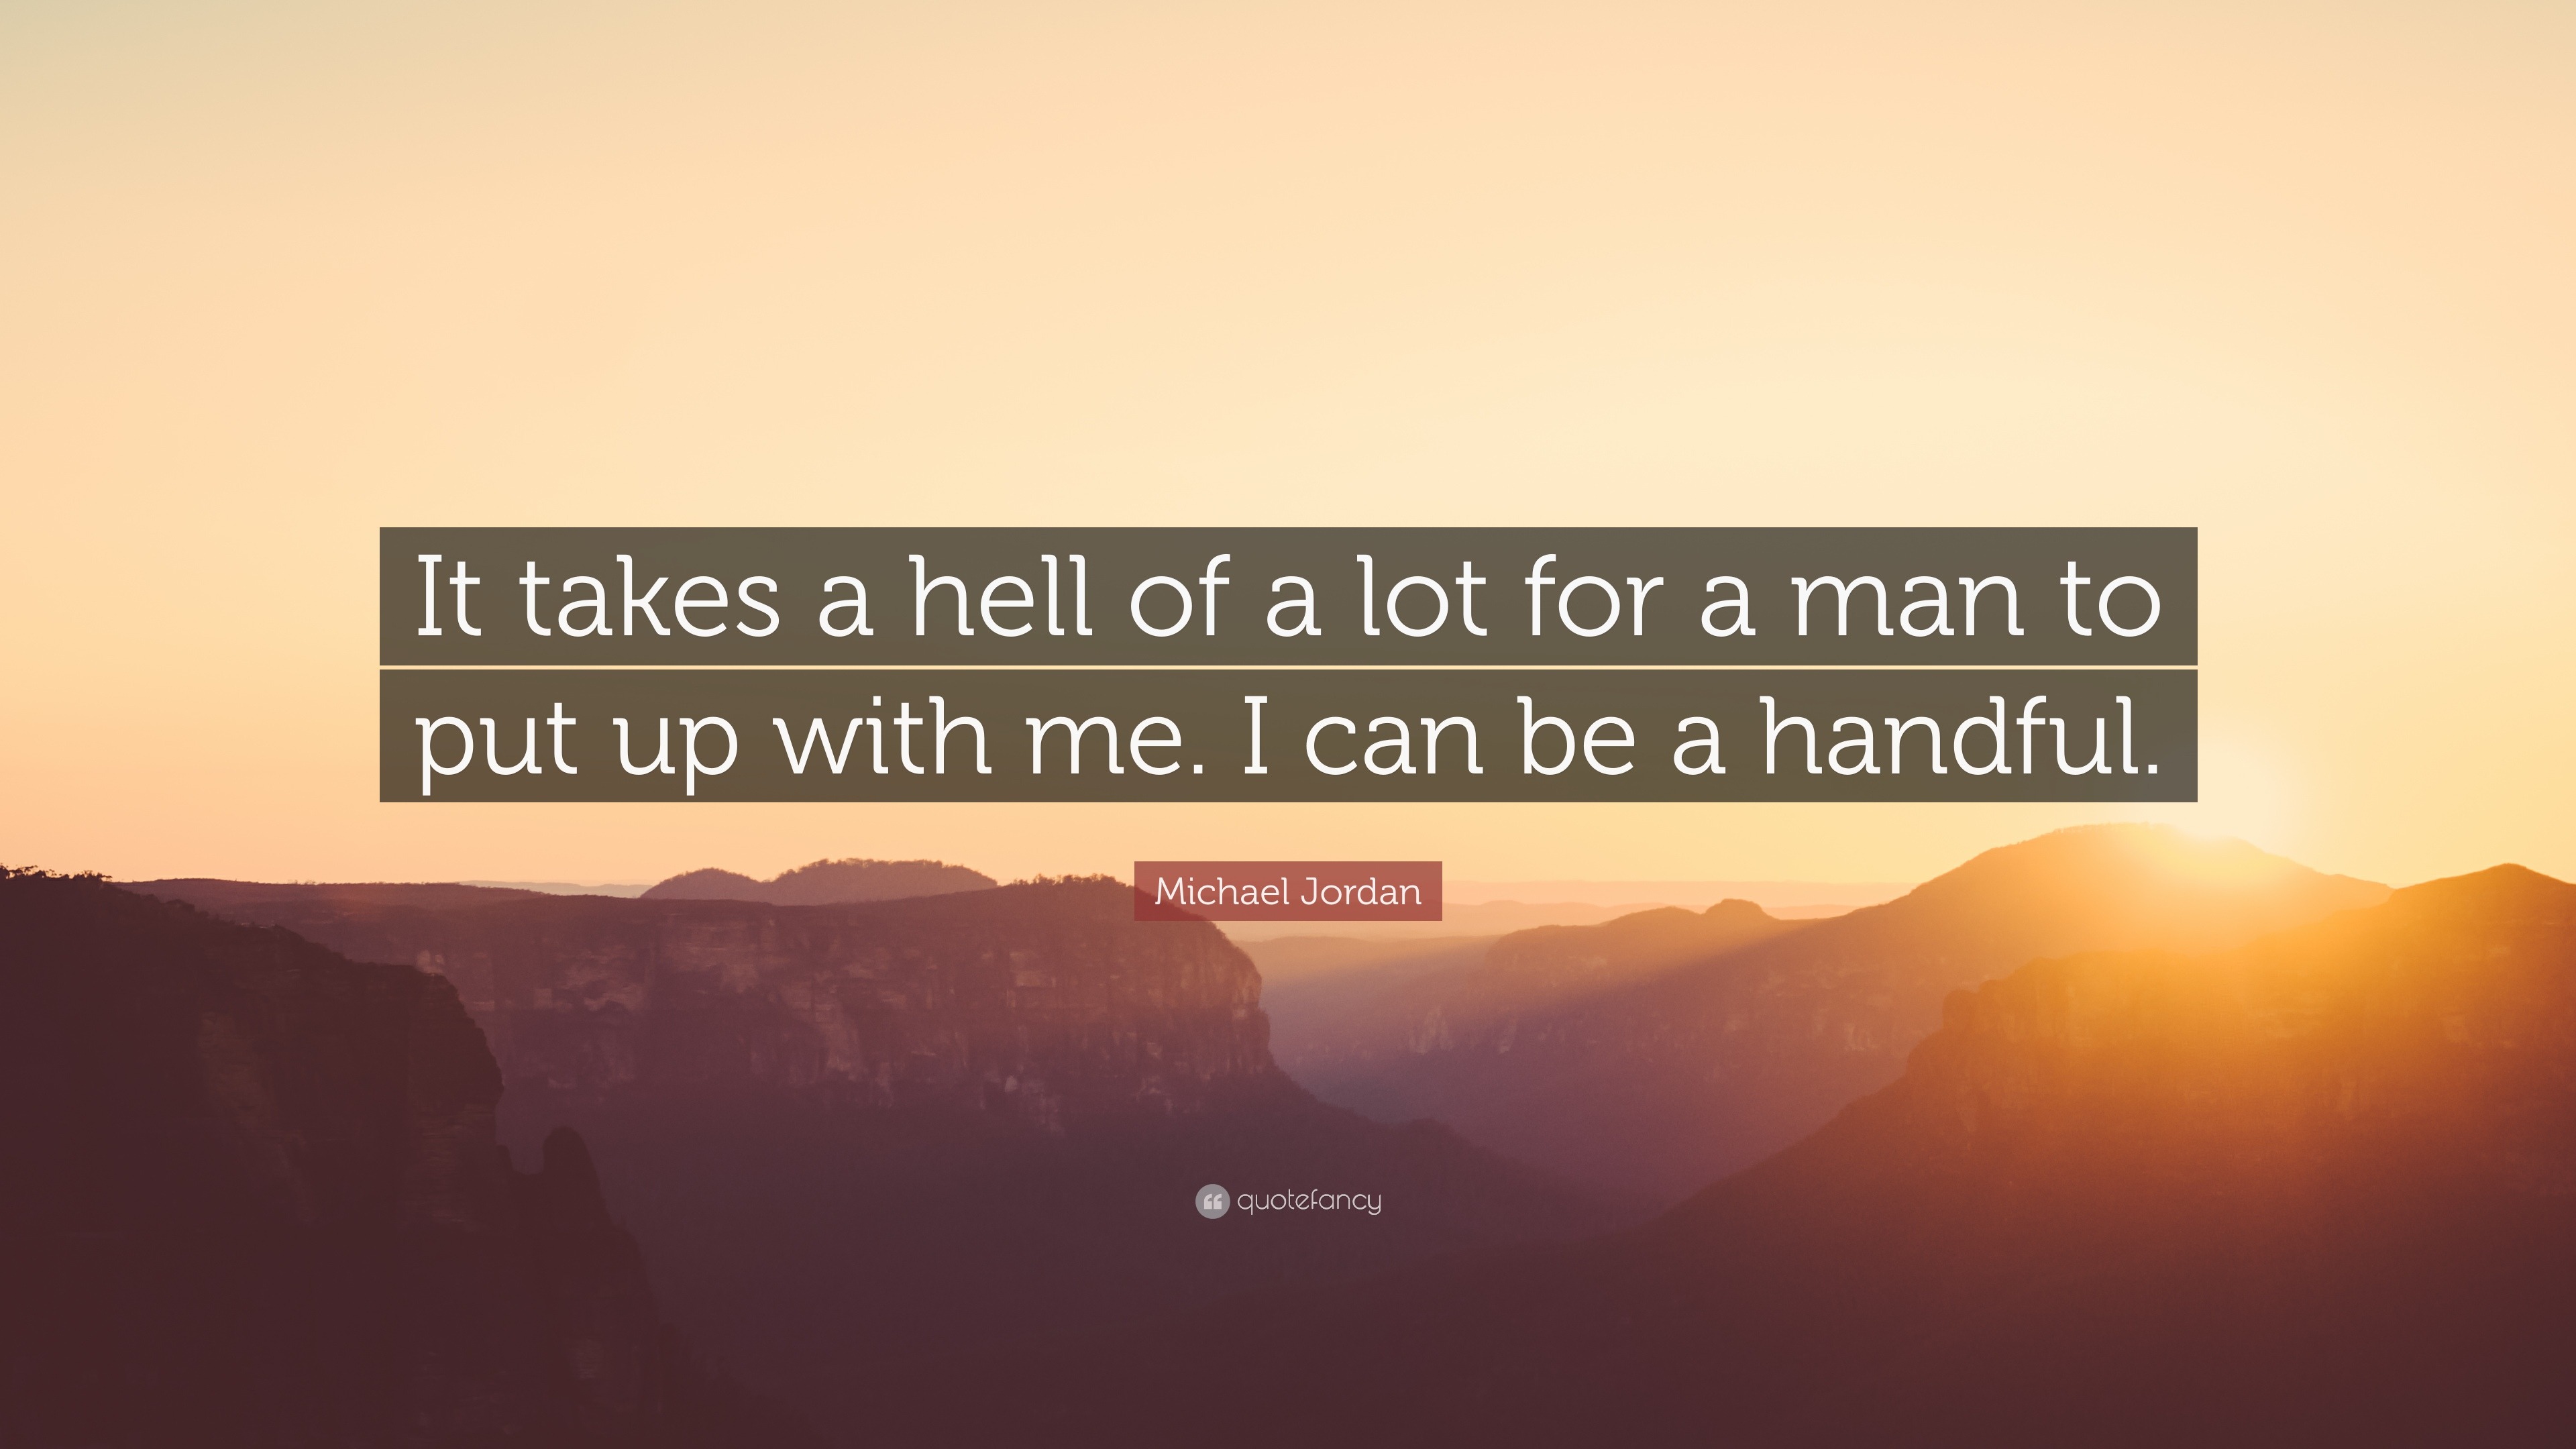 Michael Jordan Quote It Takes A Hell Of A Lot For A Man To Put Up With Me I Can Be A Handful 10 Wallpapers Quotefancy